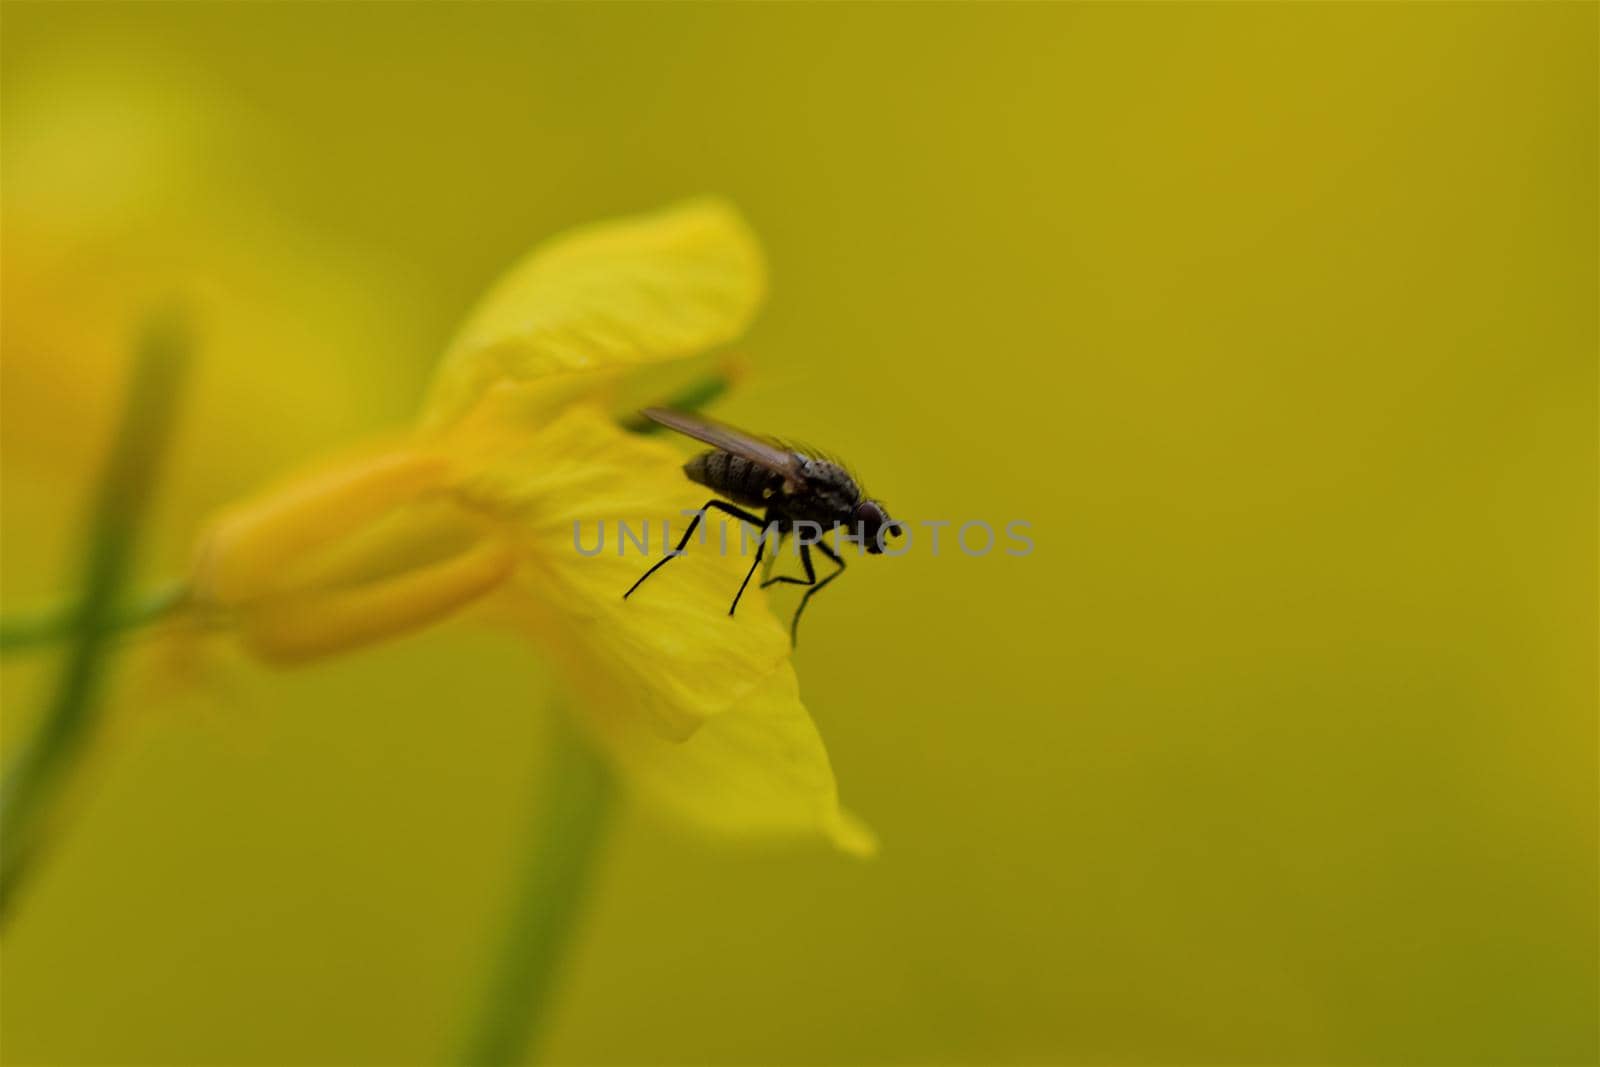 One black fly on a yellow rapeseed flower